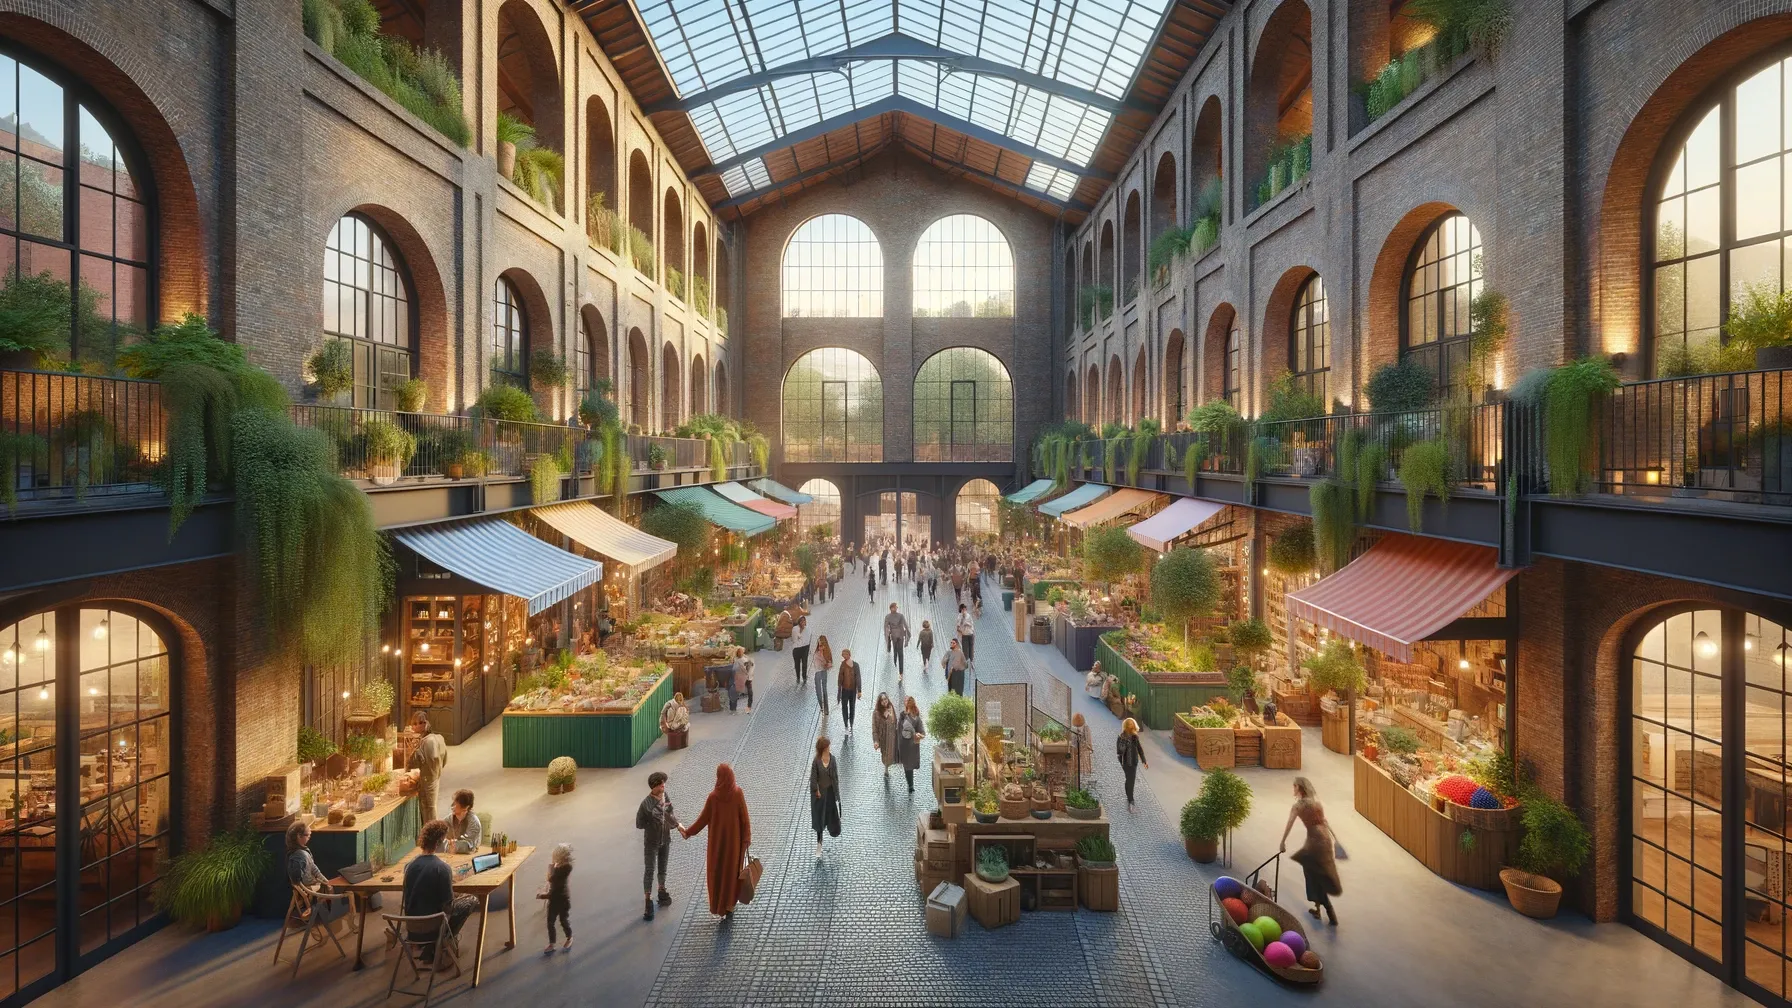 vibrant market or community space created from an old brick warehouse